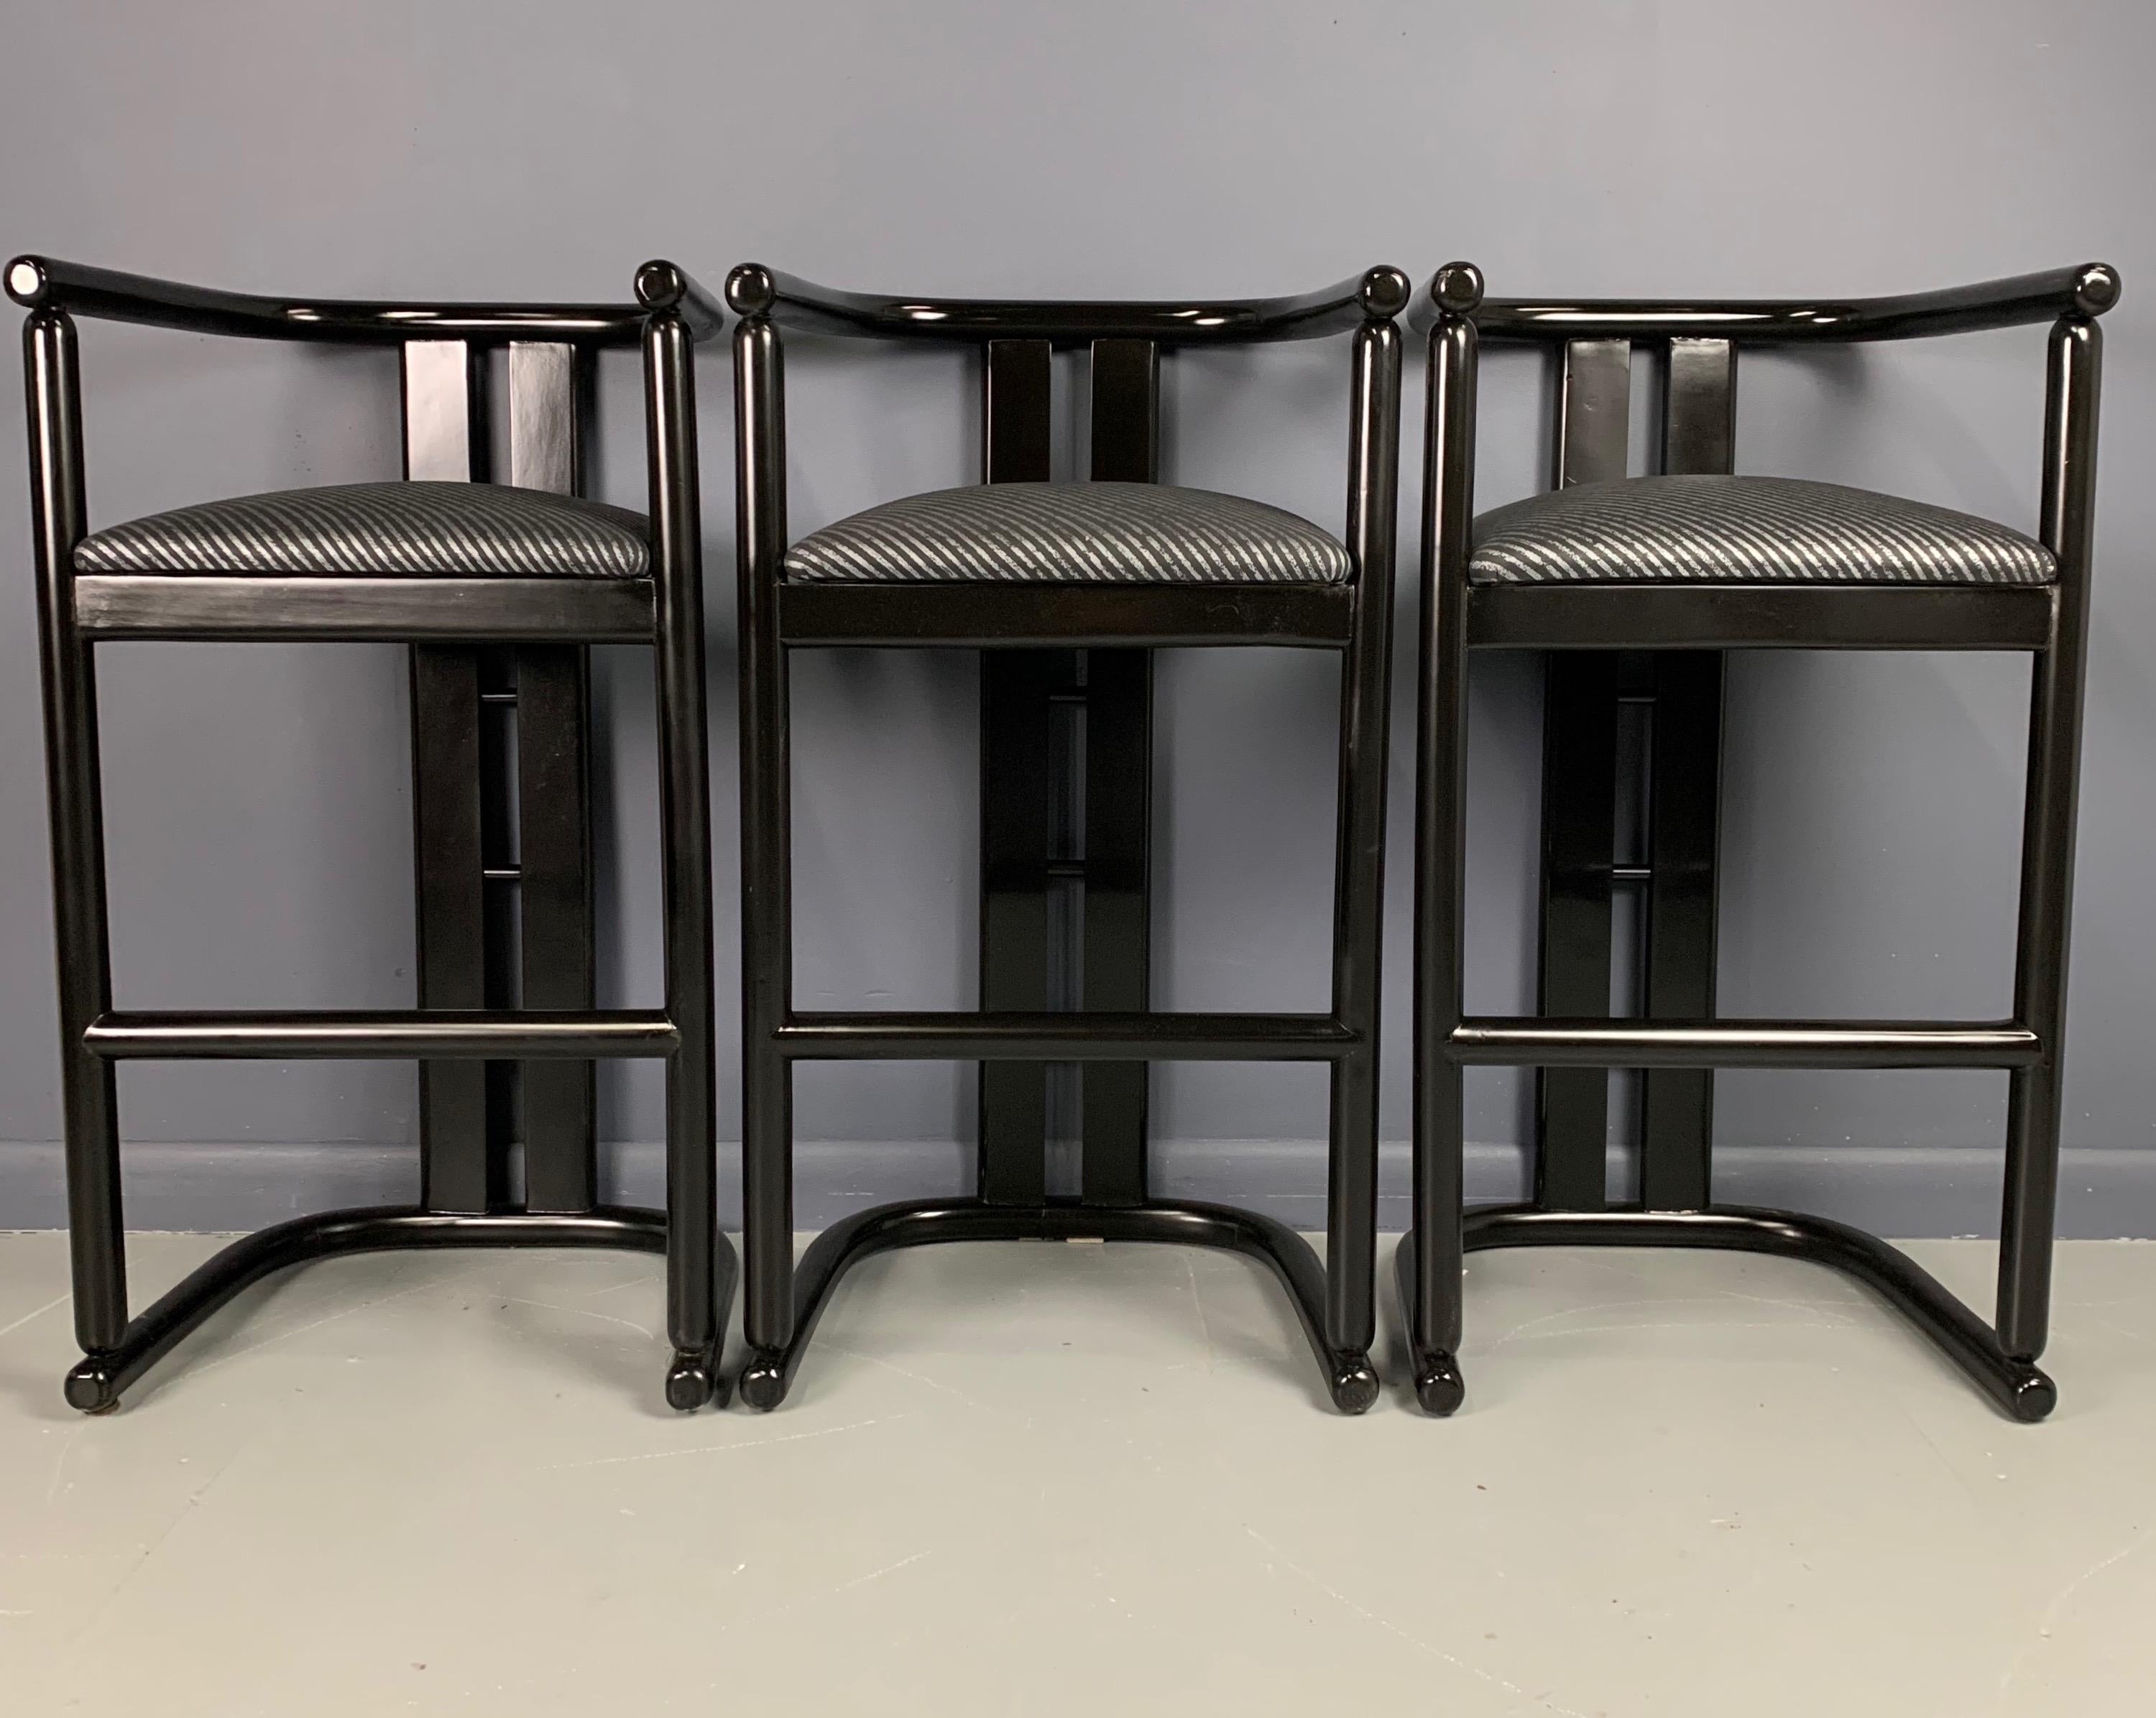 Three barrel back barstools from the 1990s in black lacquer with period upholstery. These stools have a design reminiscent of Pierre Cardin.